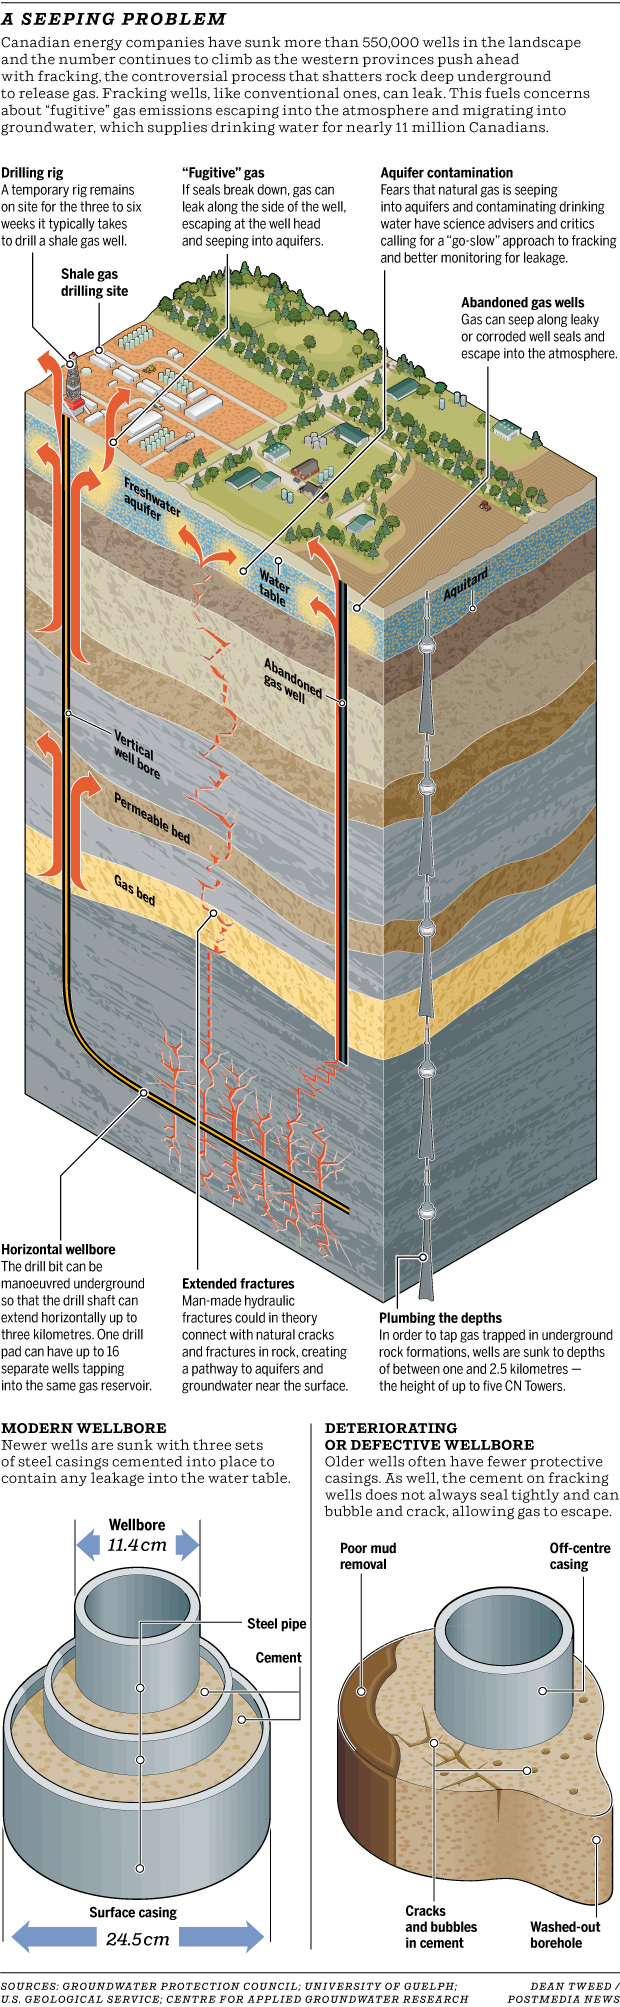 2014 12 08 gas_fracking_diagram_web in margaret munro's article 'Trouble beneath our feet, Part 1'